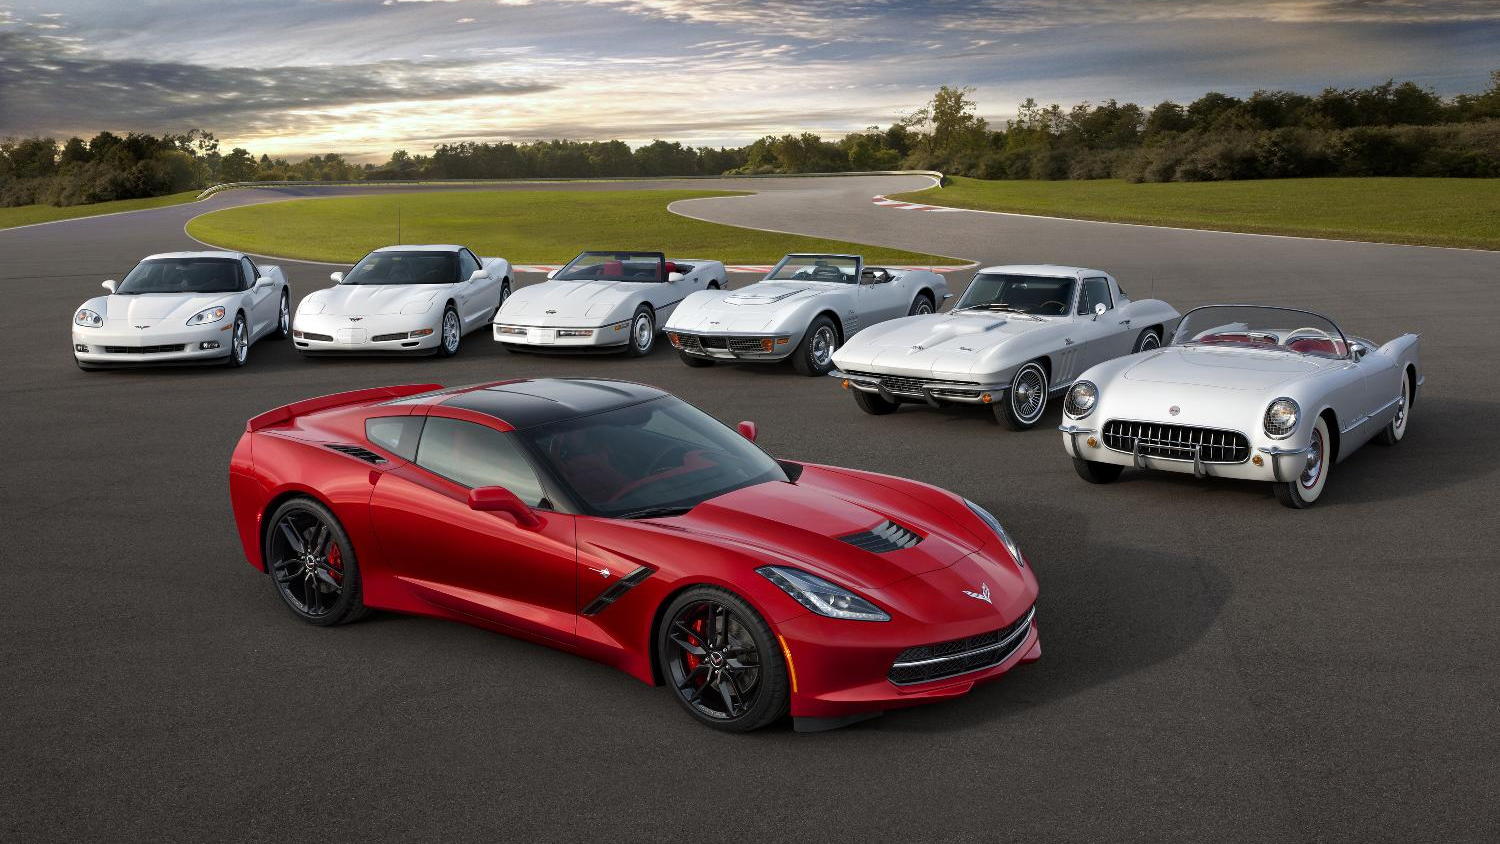 The 2014 Corvette Stingray poses with its elders - image: GM Corp